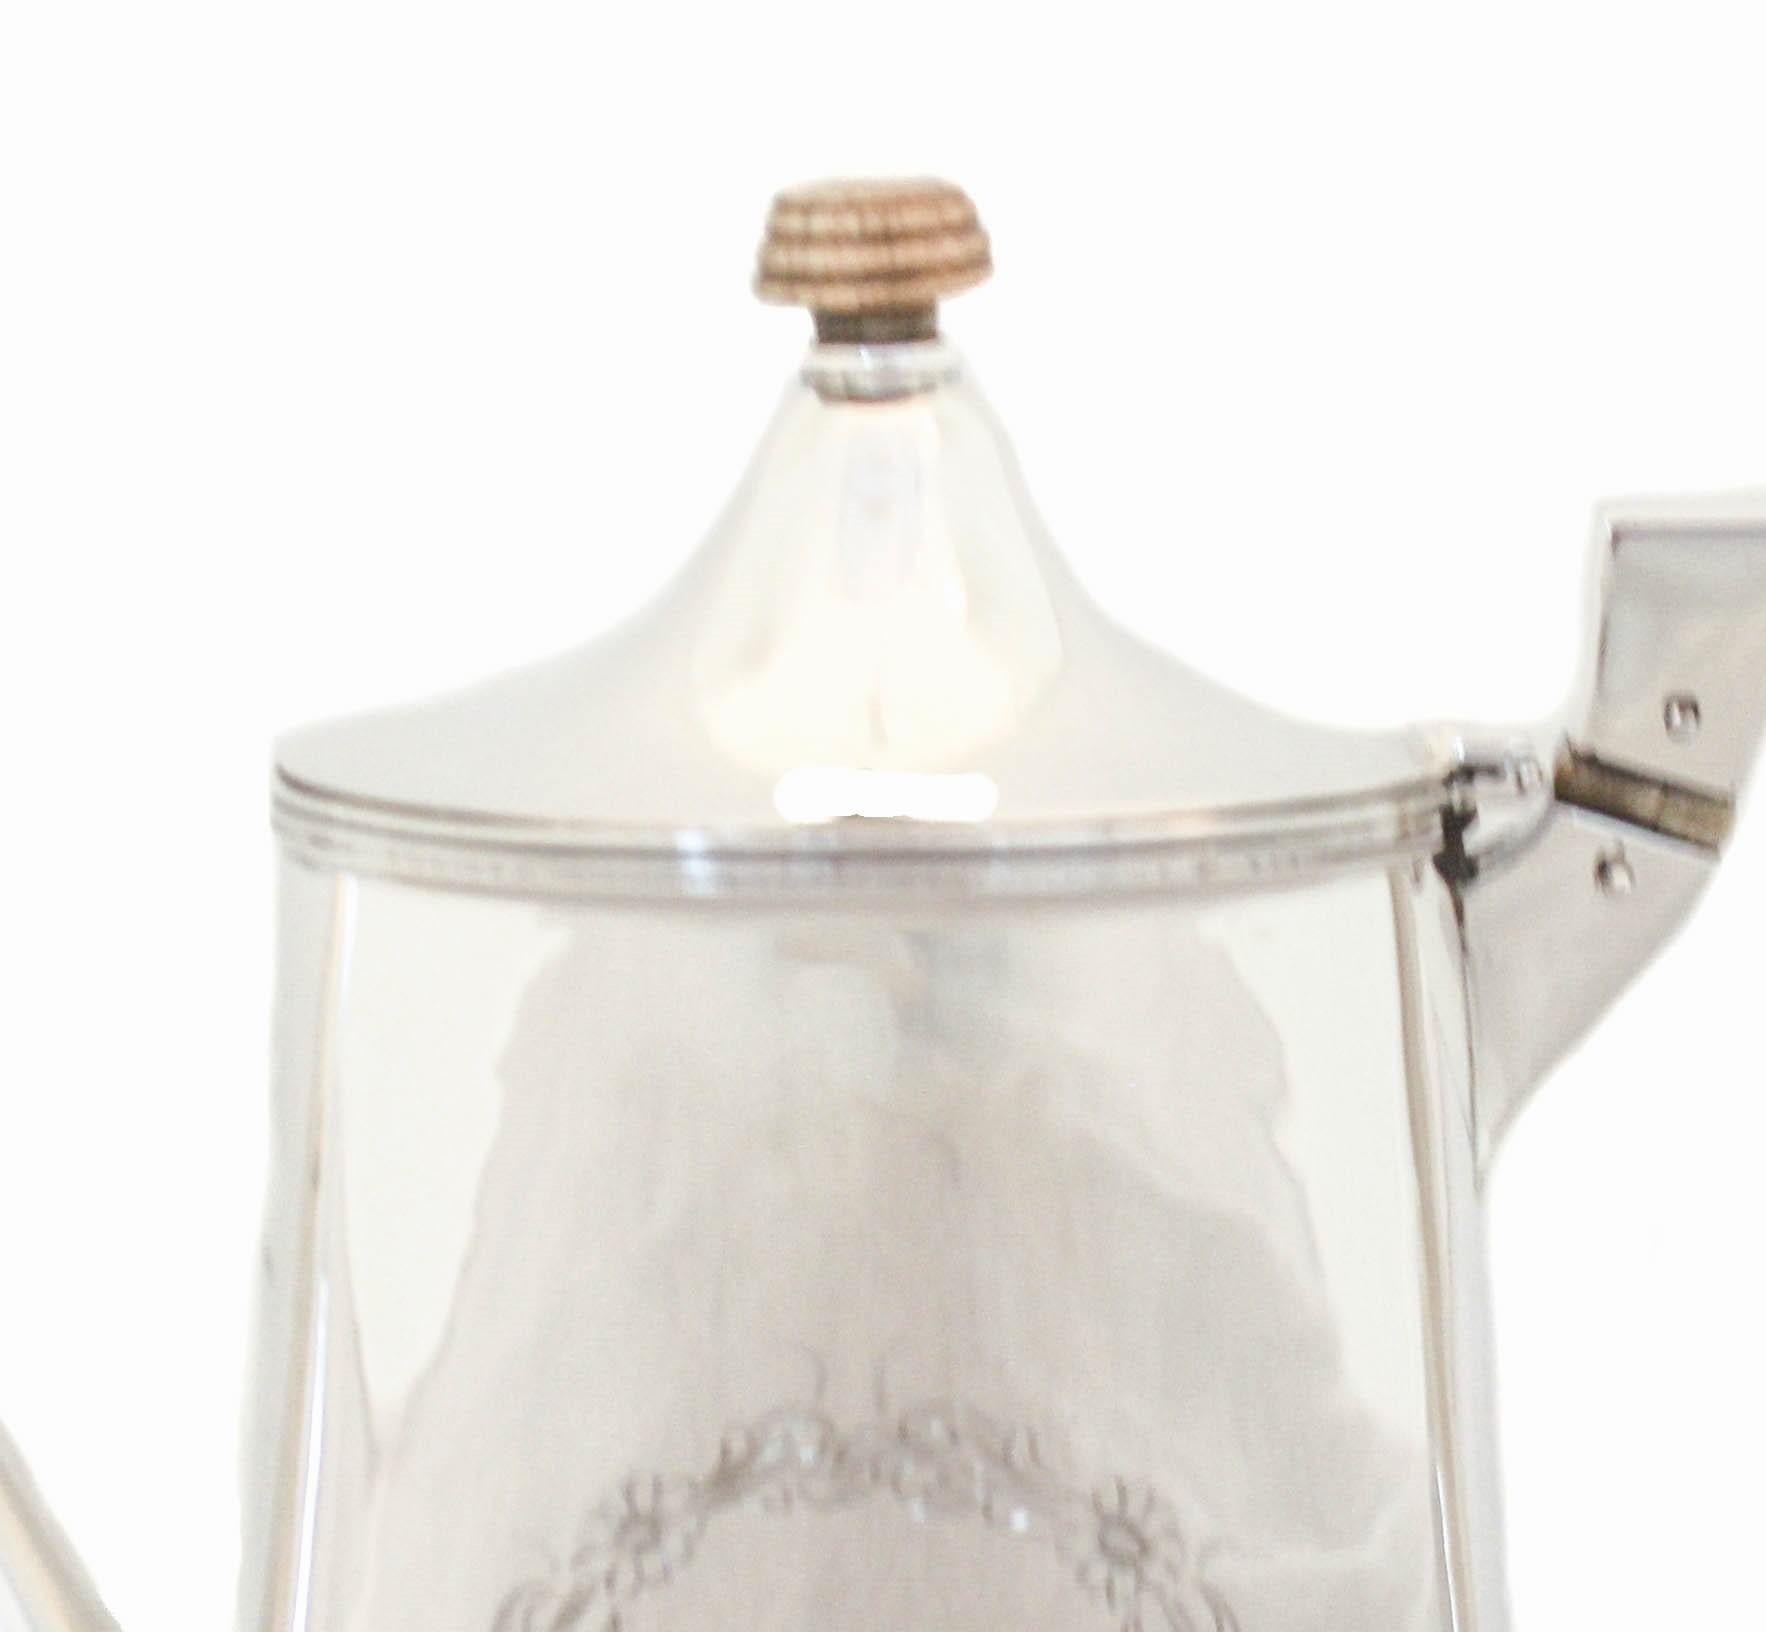 I’m delighted to offer you this sterling silver coffee/tea pot by Richard Dimes Silver of Boston, Massachusetts. Designed in the federalist style it is austere and simple. There is a floral motif on each side but nothing else. On one side there is a